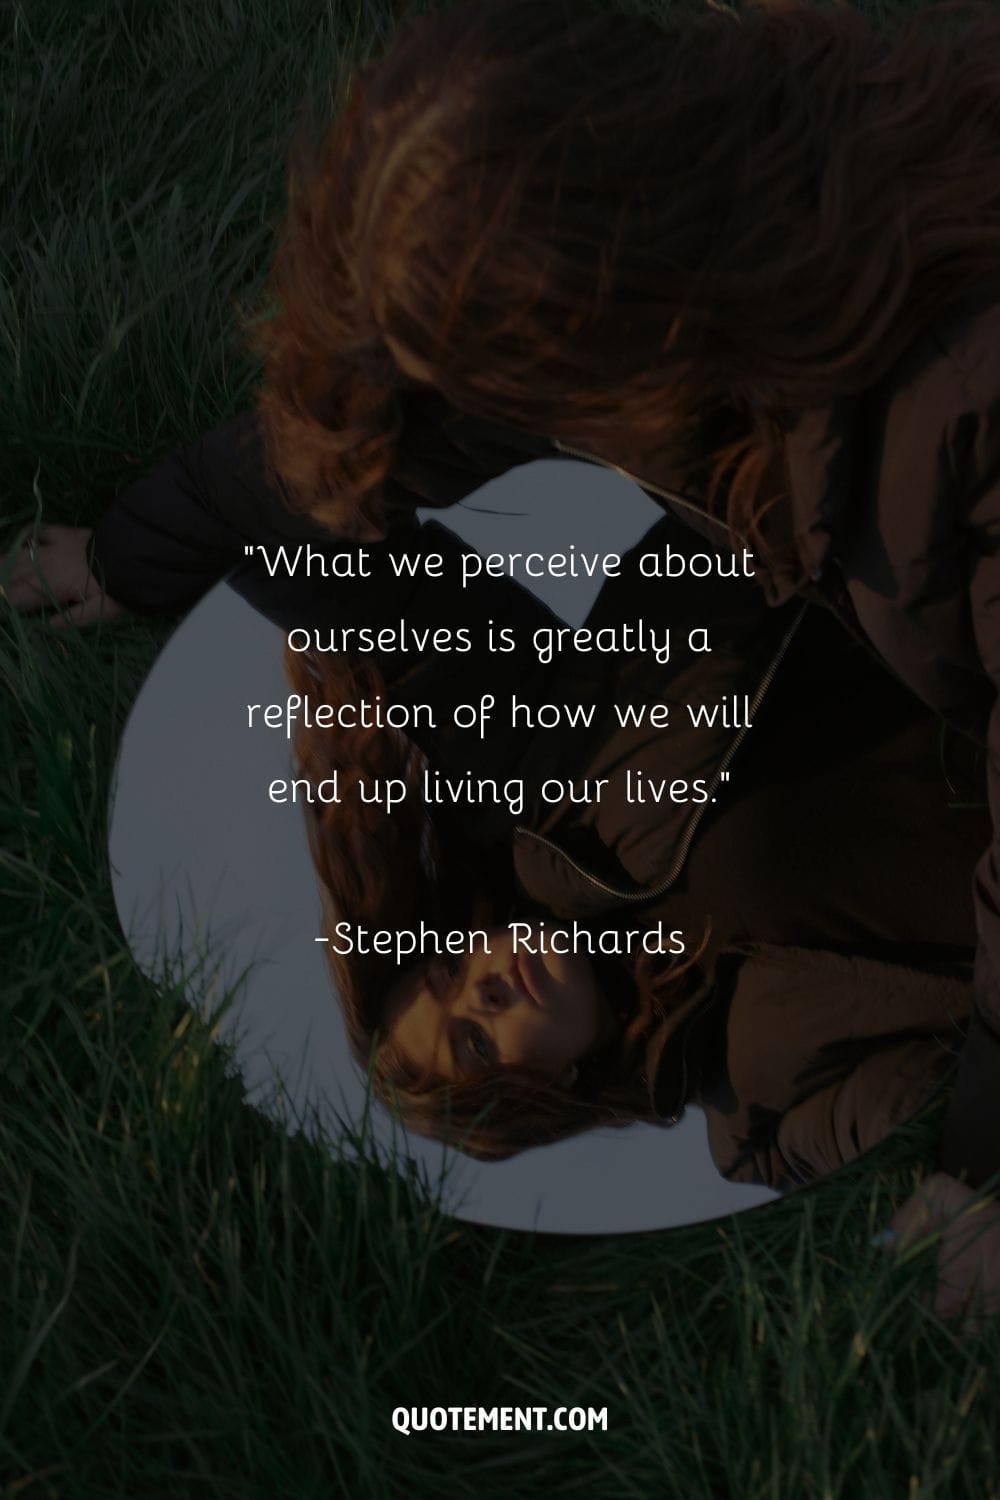 What we perceive about ourselves is greatly a reflection of how we will end up living our lives. – Stephen Richards